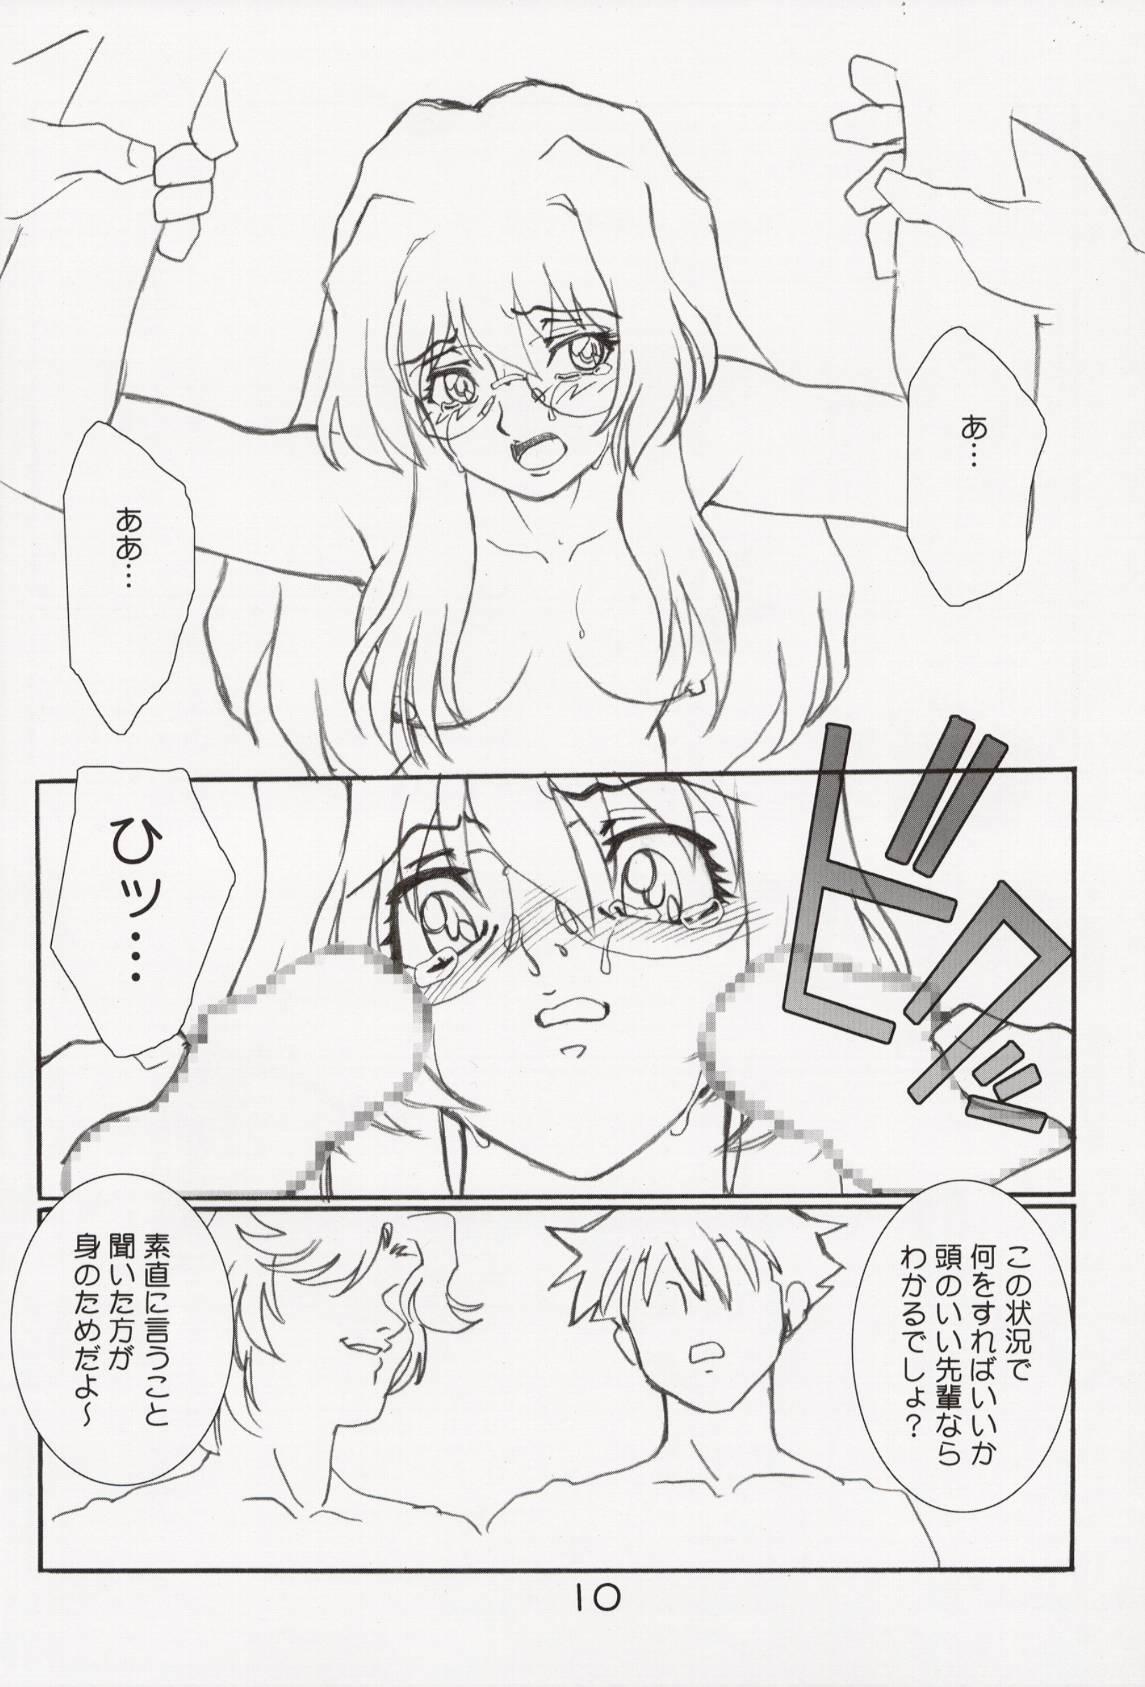 She Sudden Onegai Twins SYNDROME - Onegai twins Passivo - Page 11